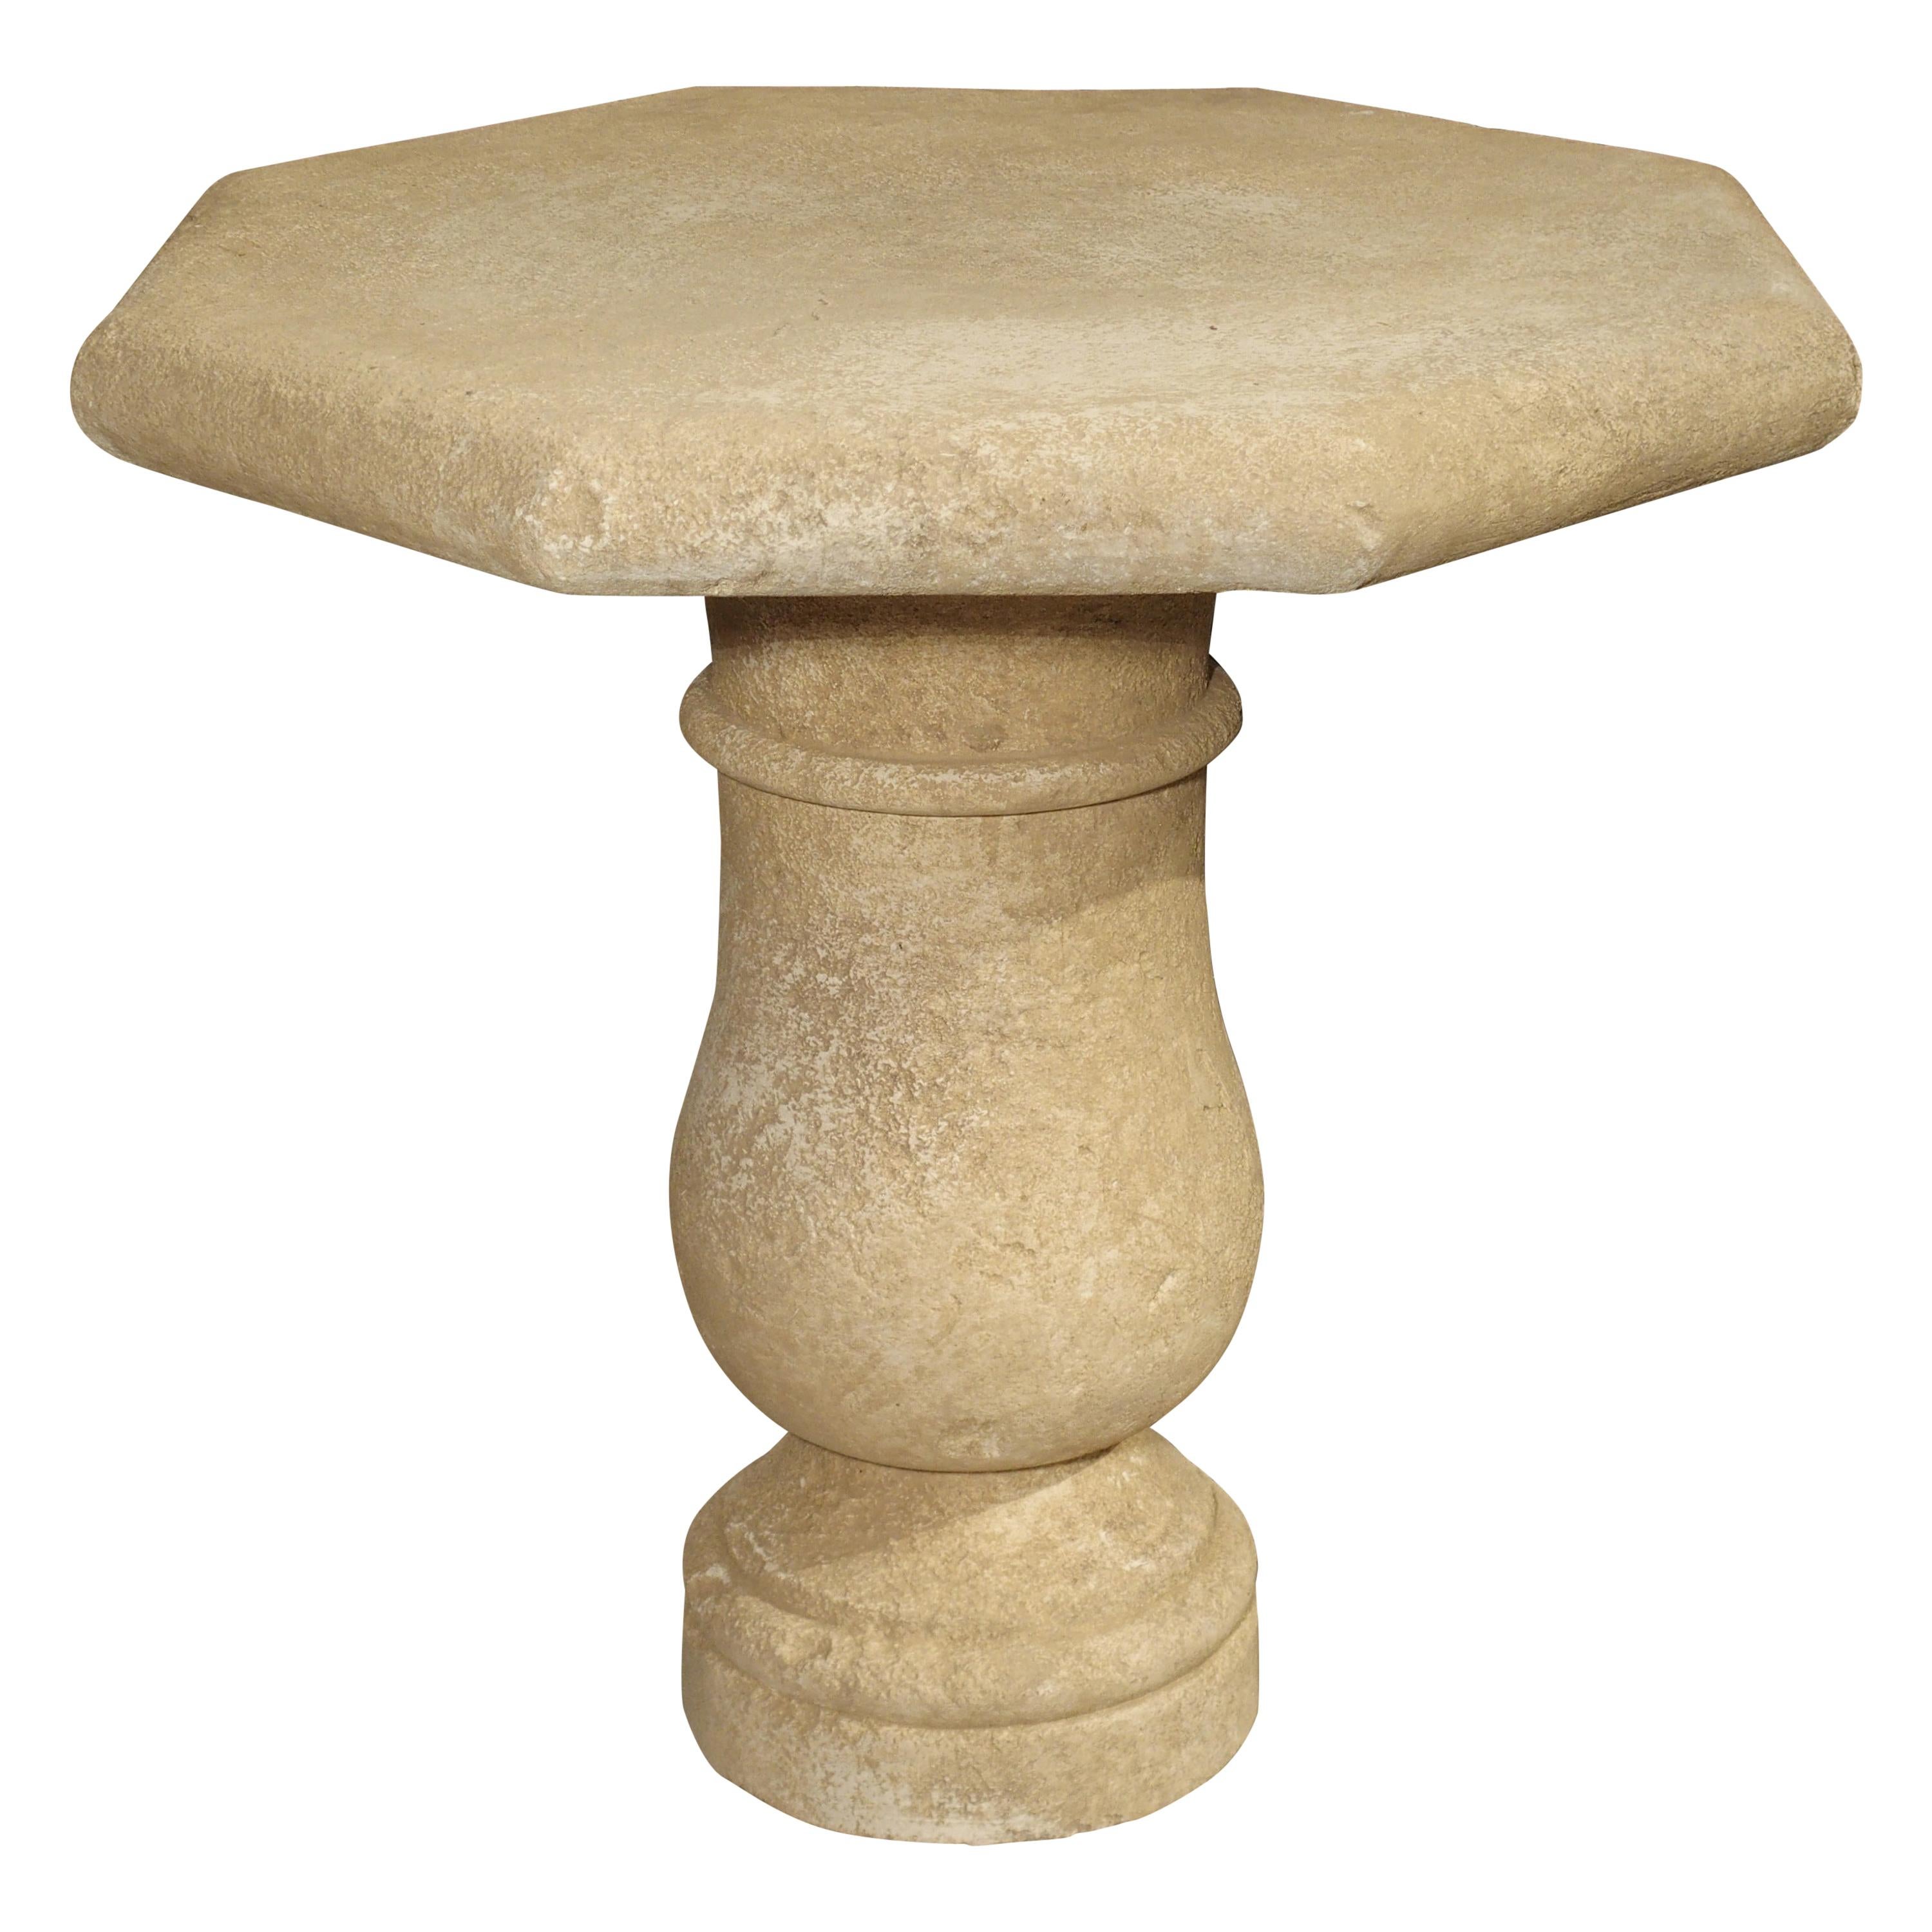 Carved Octagonal Stone Side Table from Provence, France